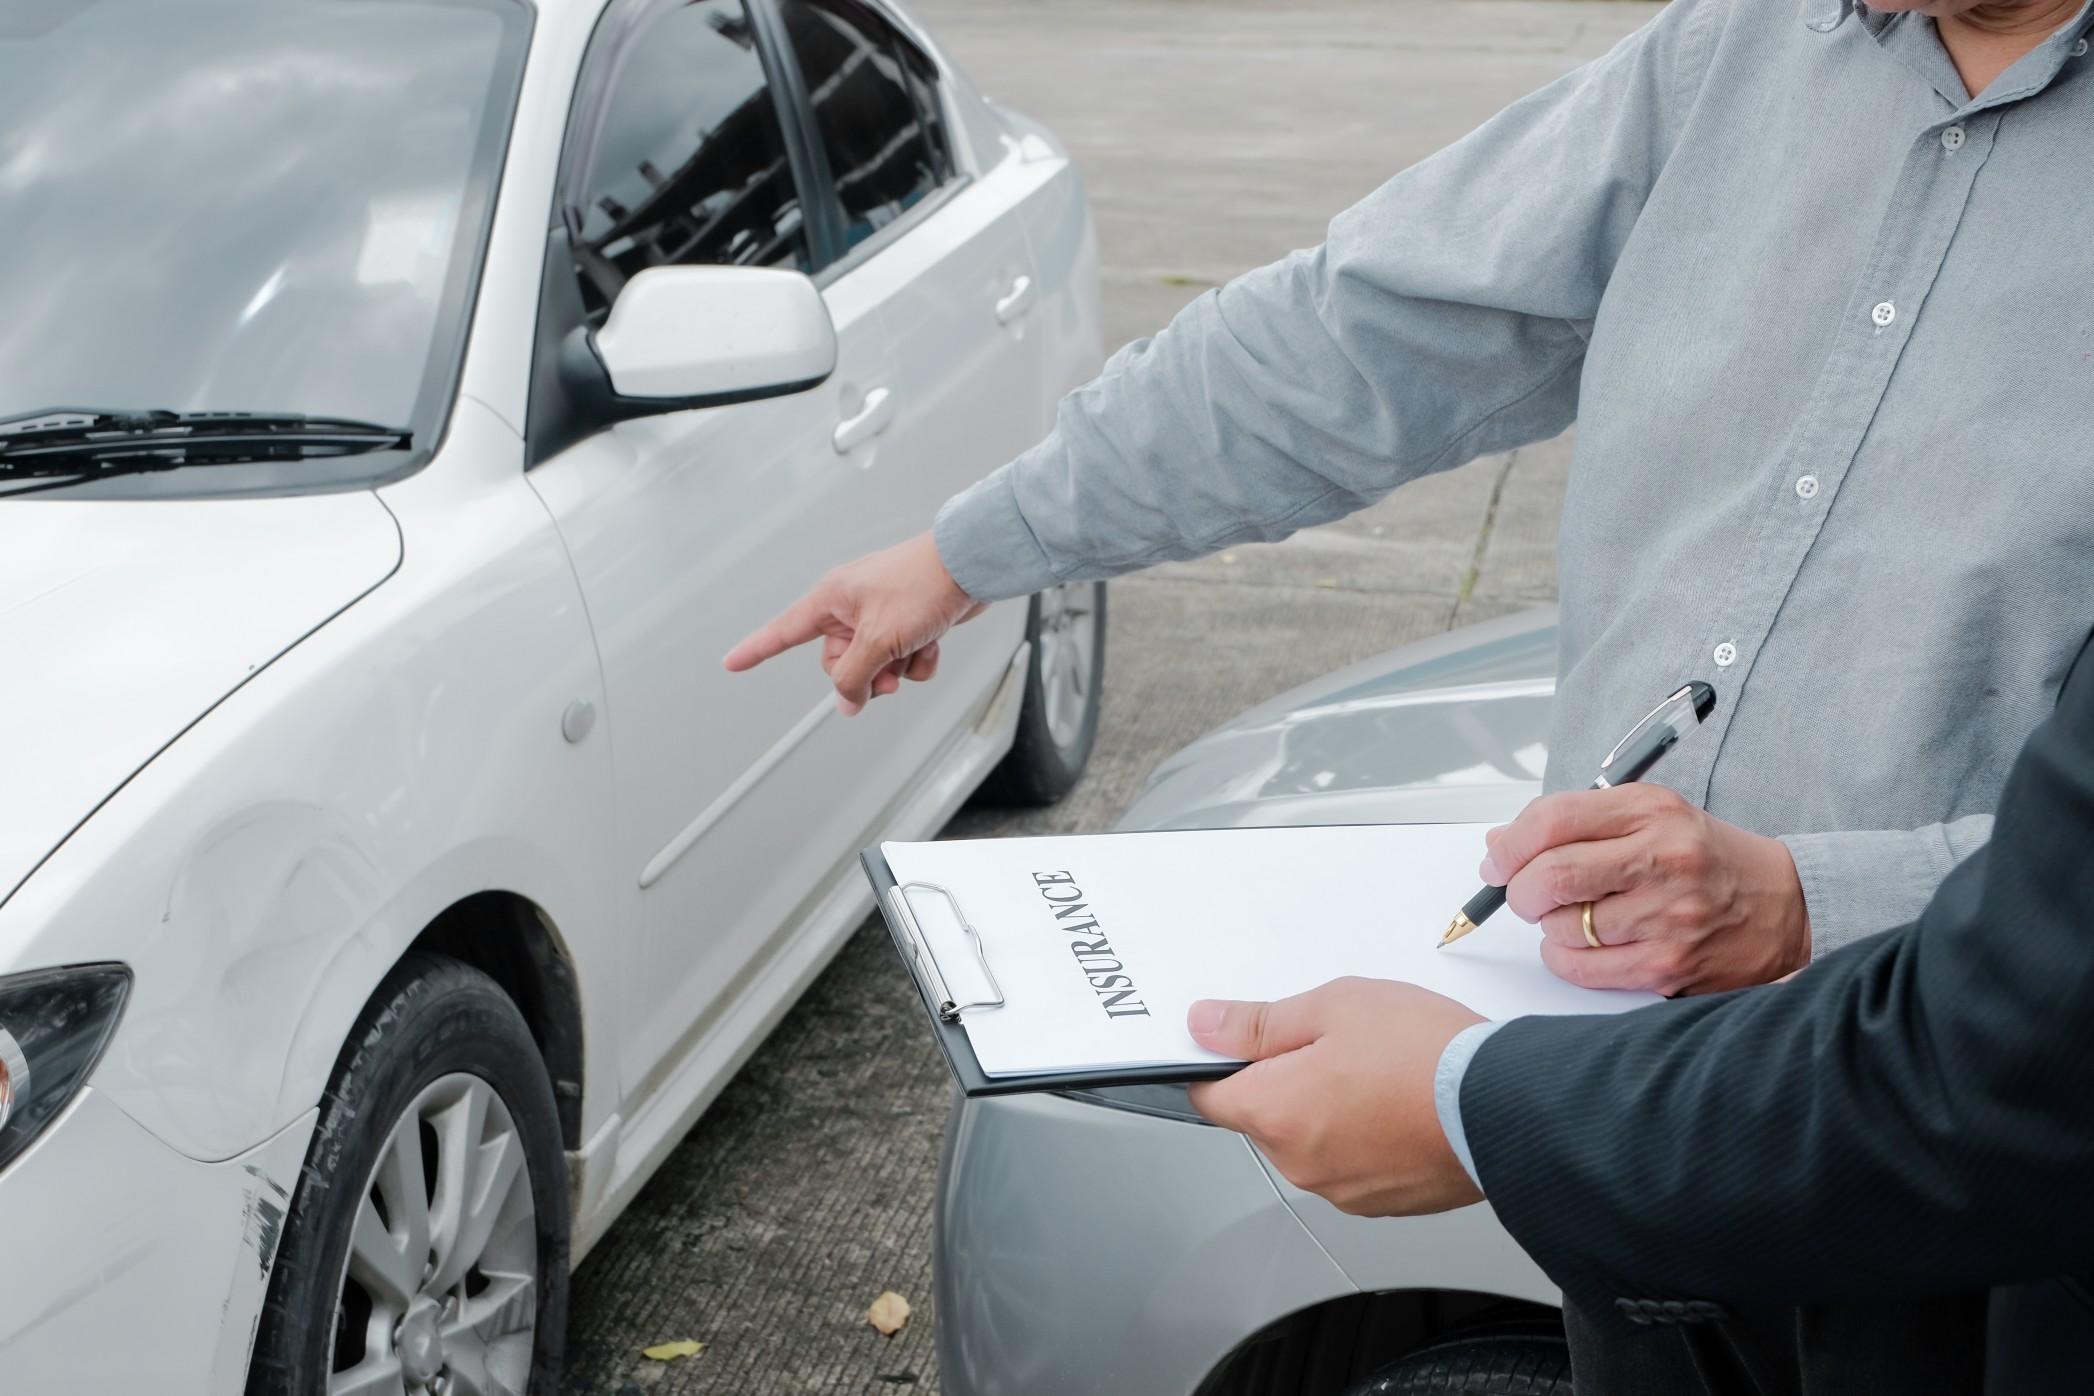 Car insurance can rise fast from just a few minor infractions.